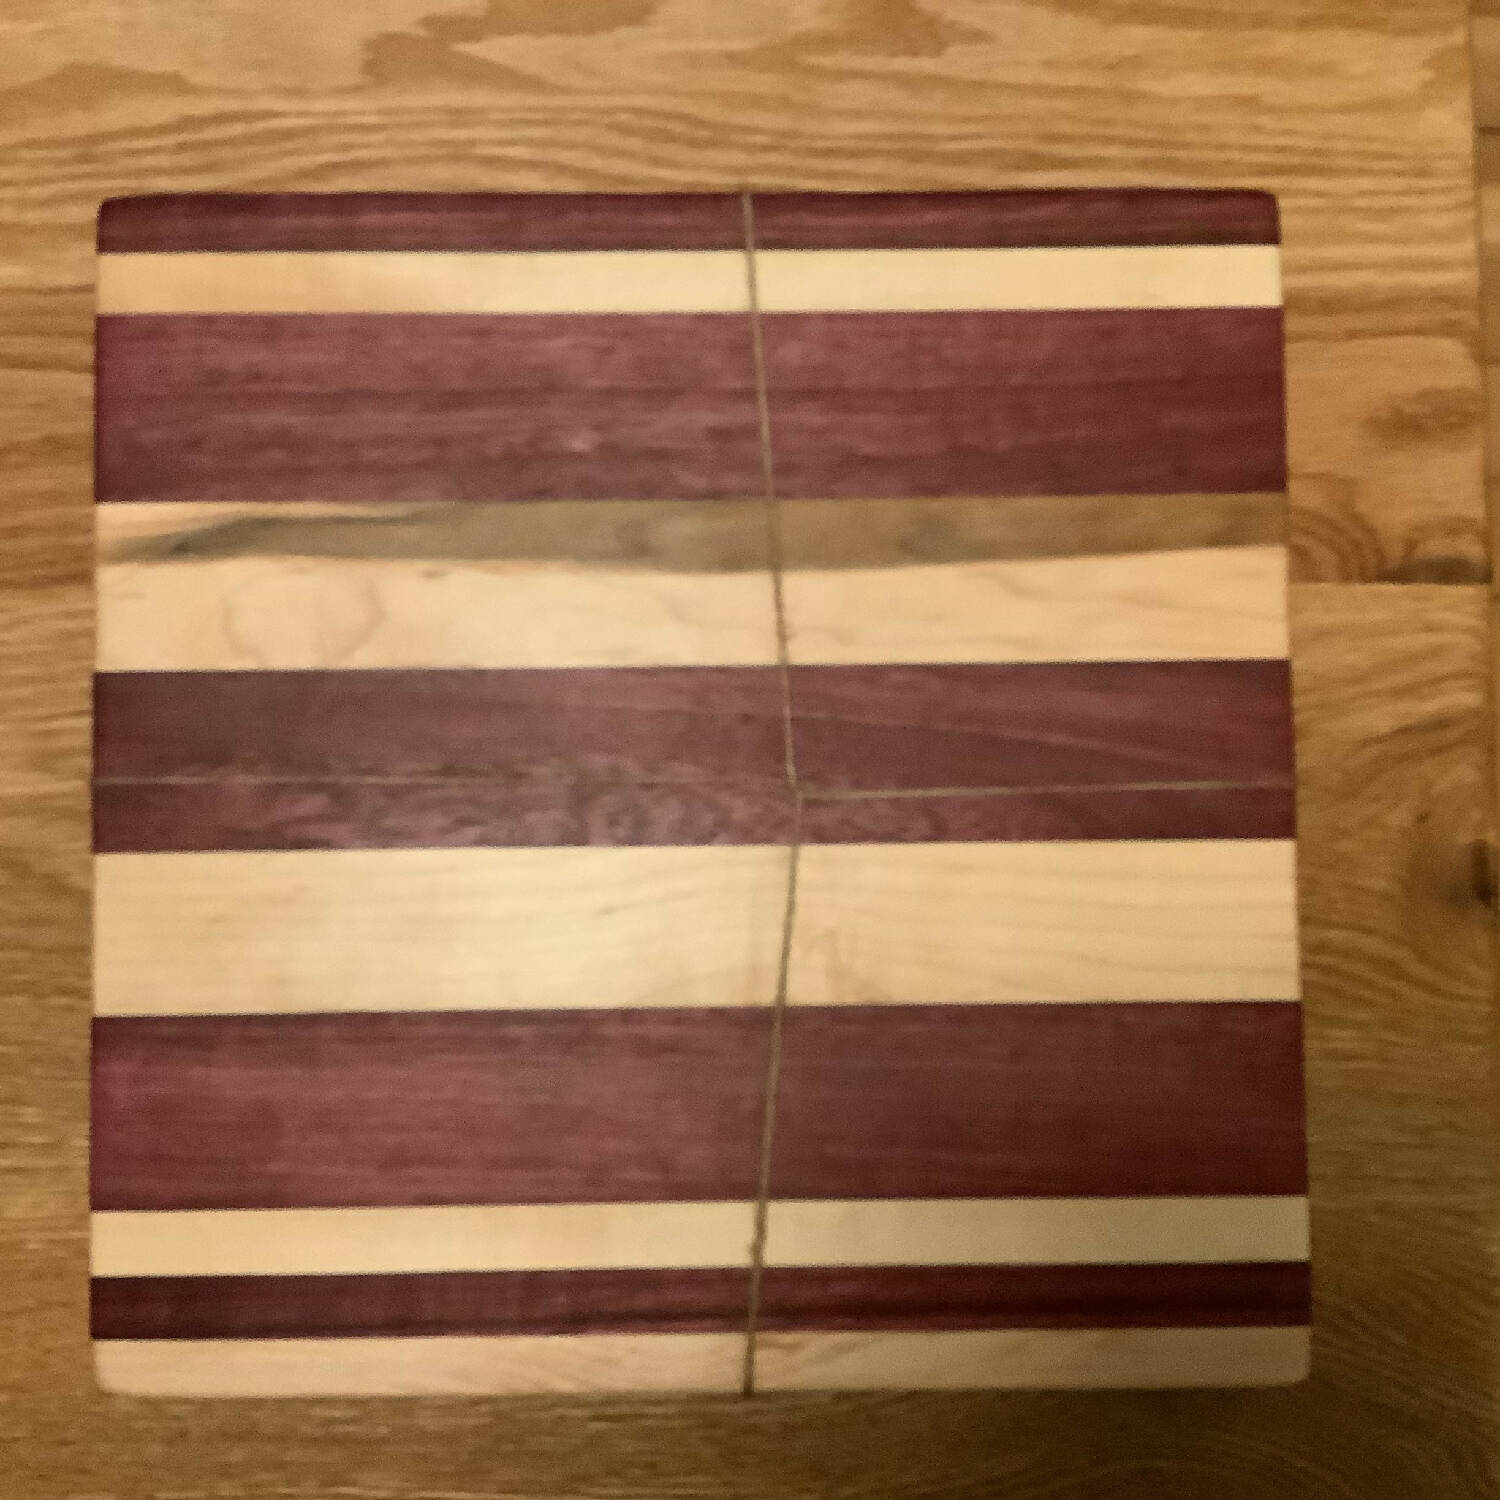 12”x12” maple cutting board with purple heart stripes